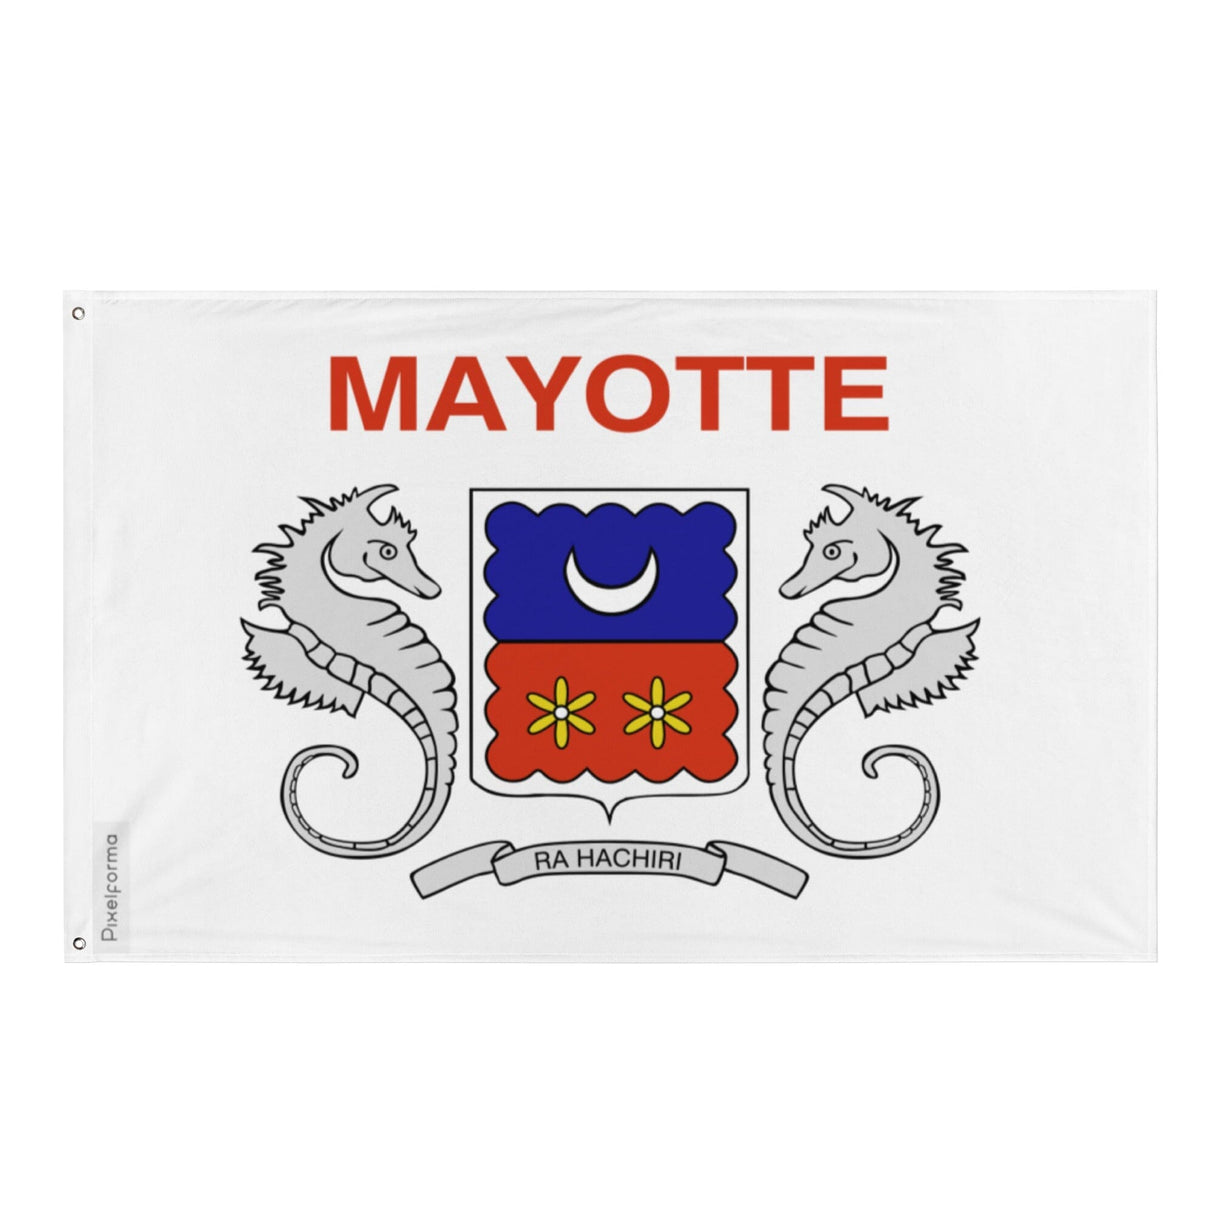 Mayotte Flag in Multiple Sizes 100% Polyester Print with Double Hem - Pixelforma